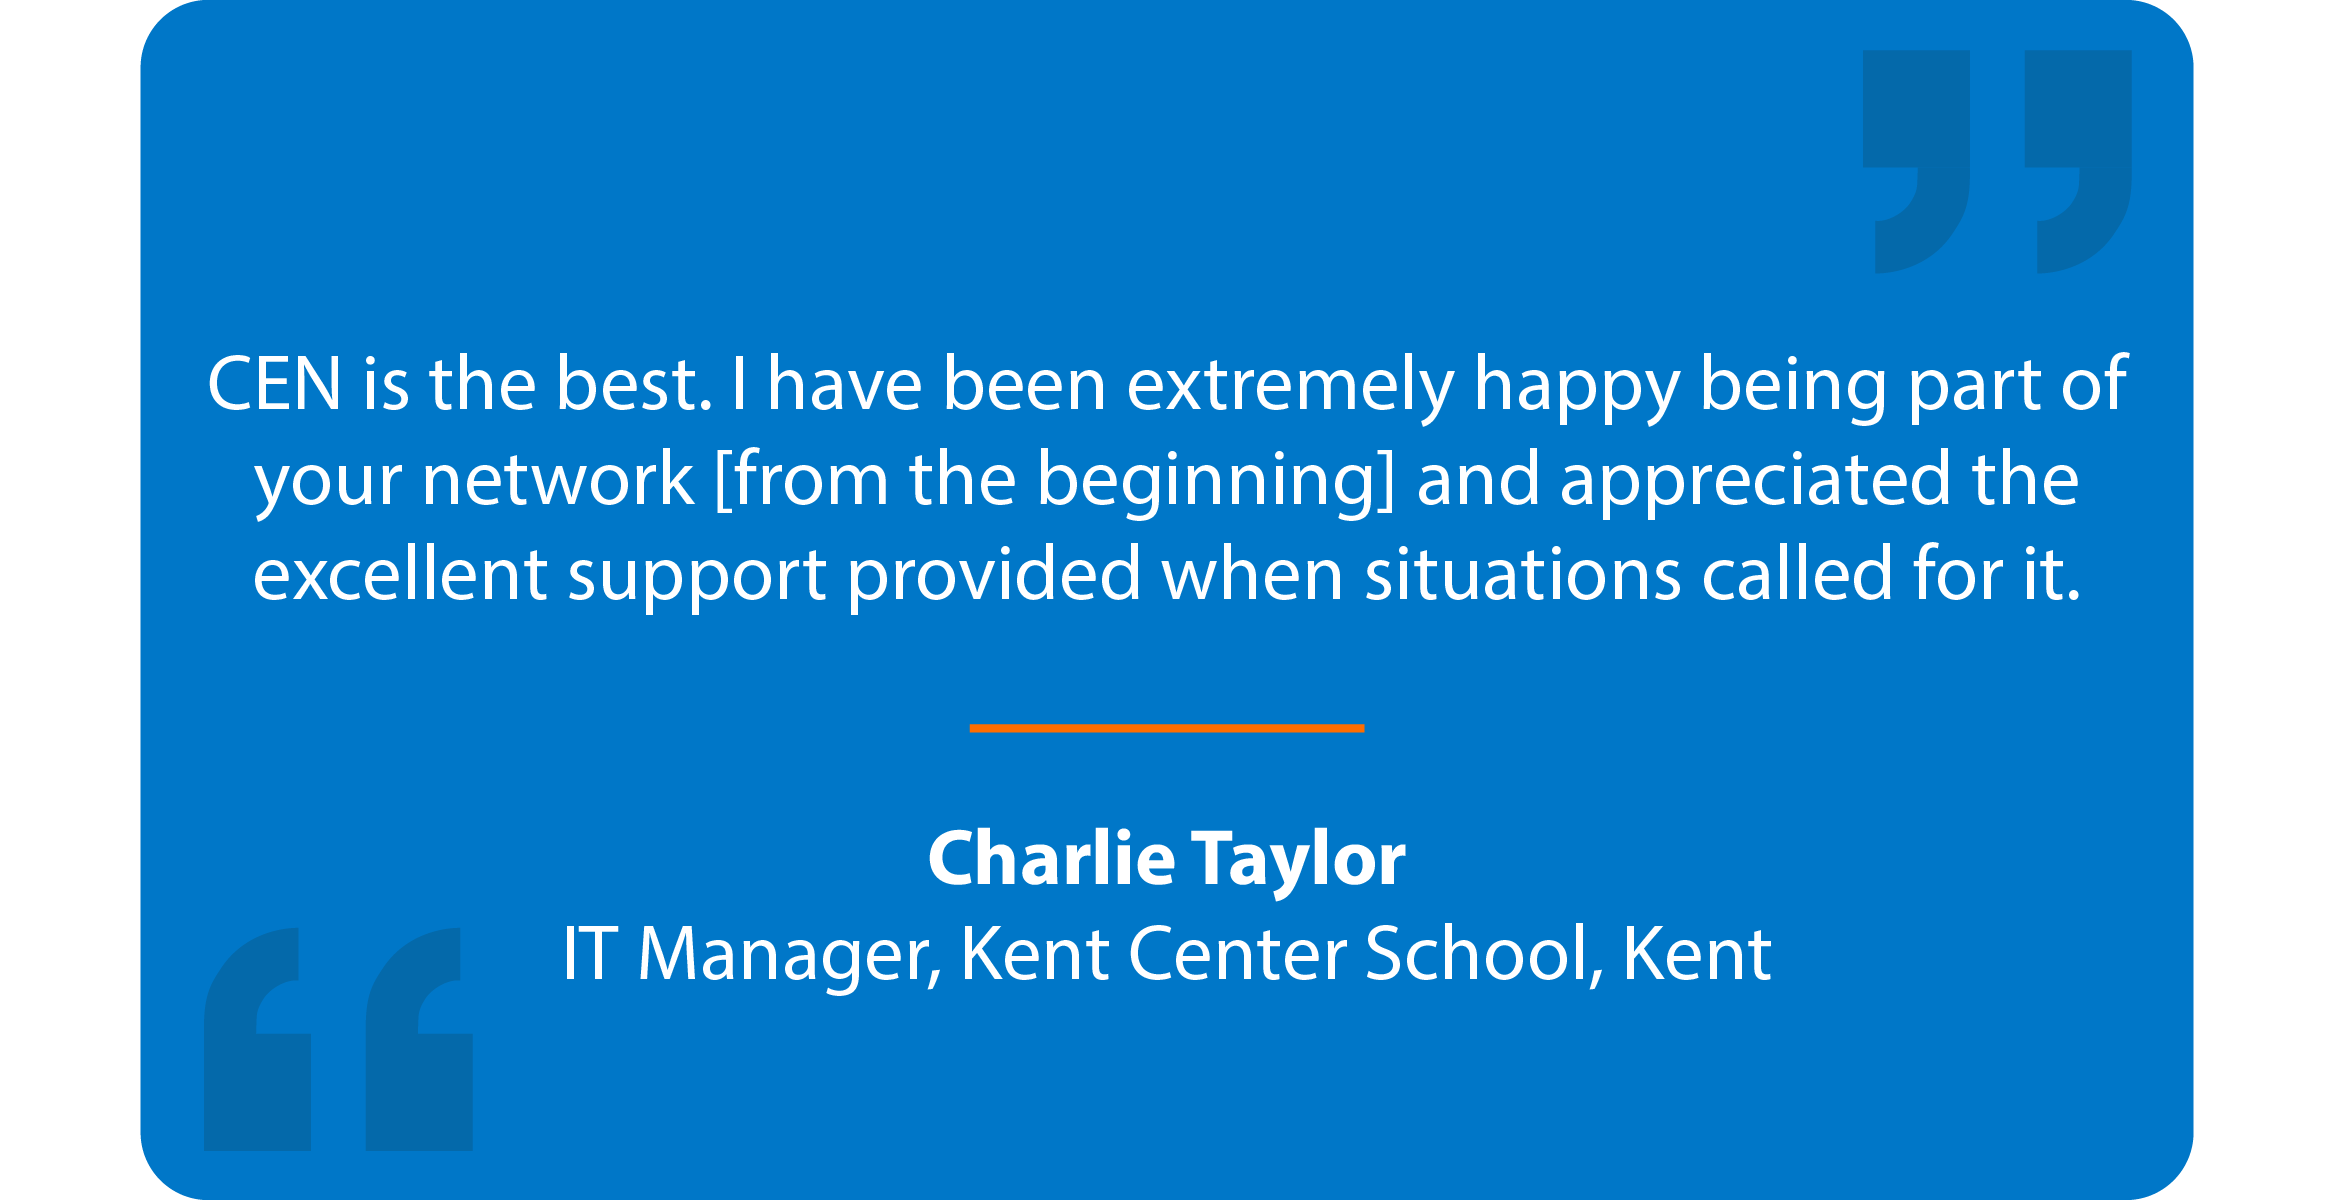 Blue box with quote that reads: CEN is the best. I have been extremely happy being part of your network [from the beginning] and appreciated the excellent support provided when situations called for it. Charlie Taylor IT Manager, Kent Center School, Kent